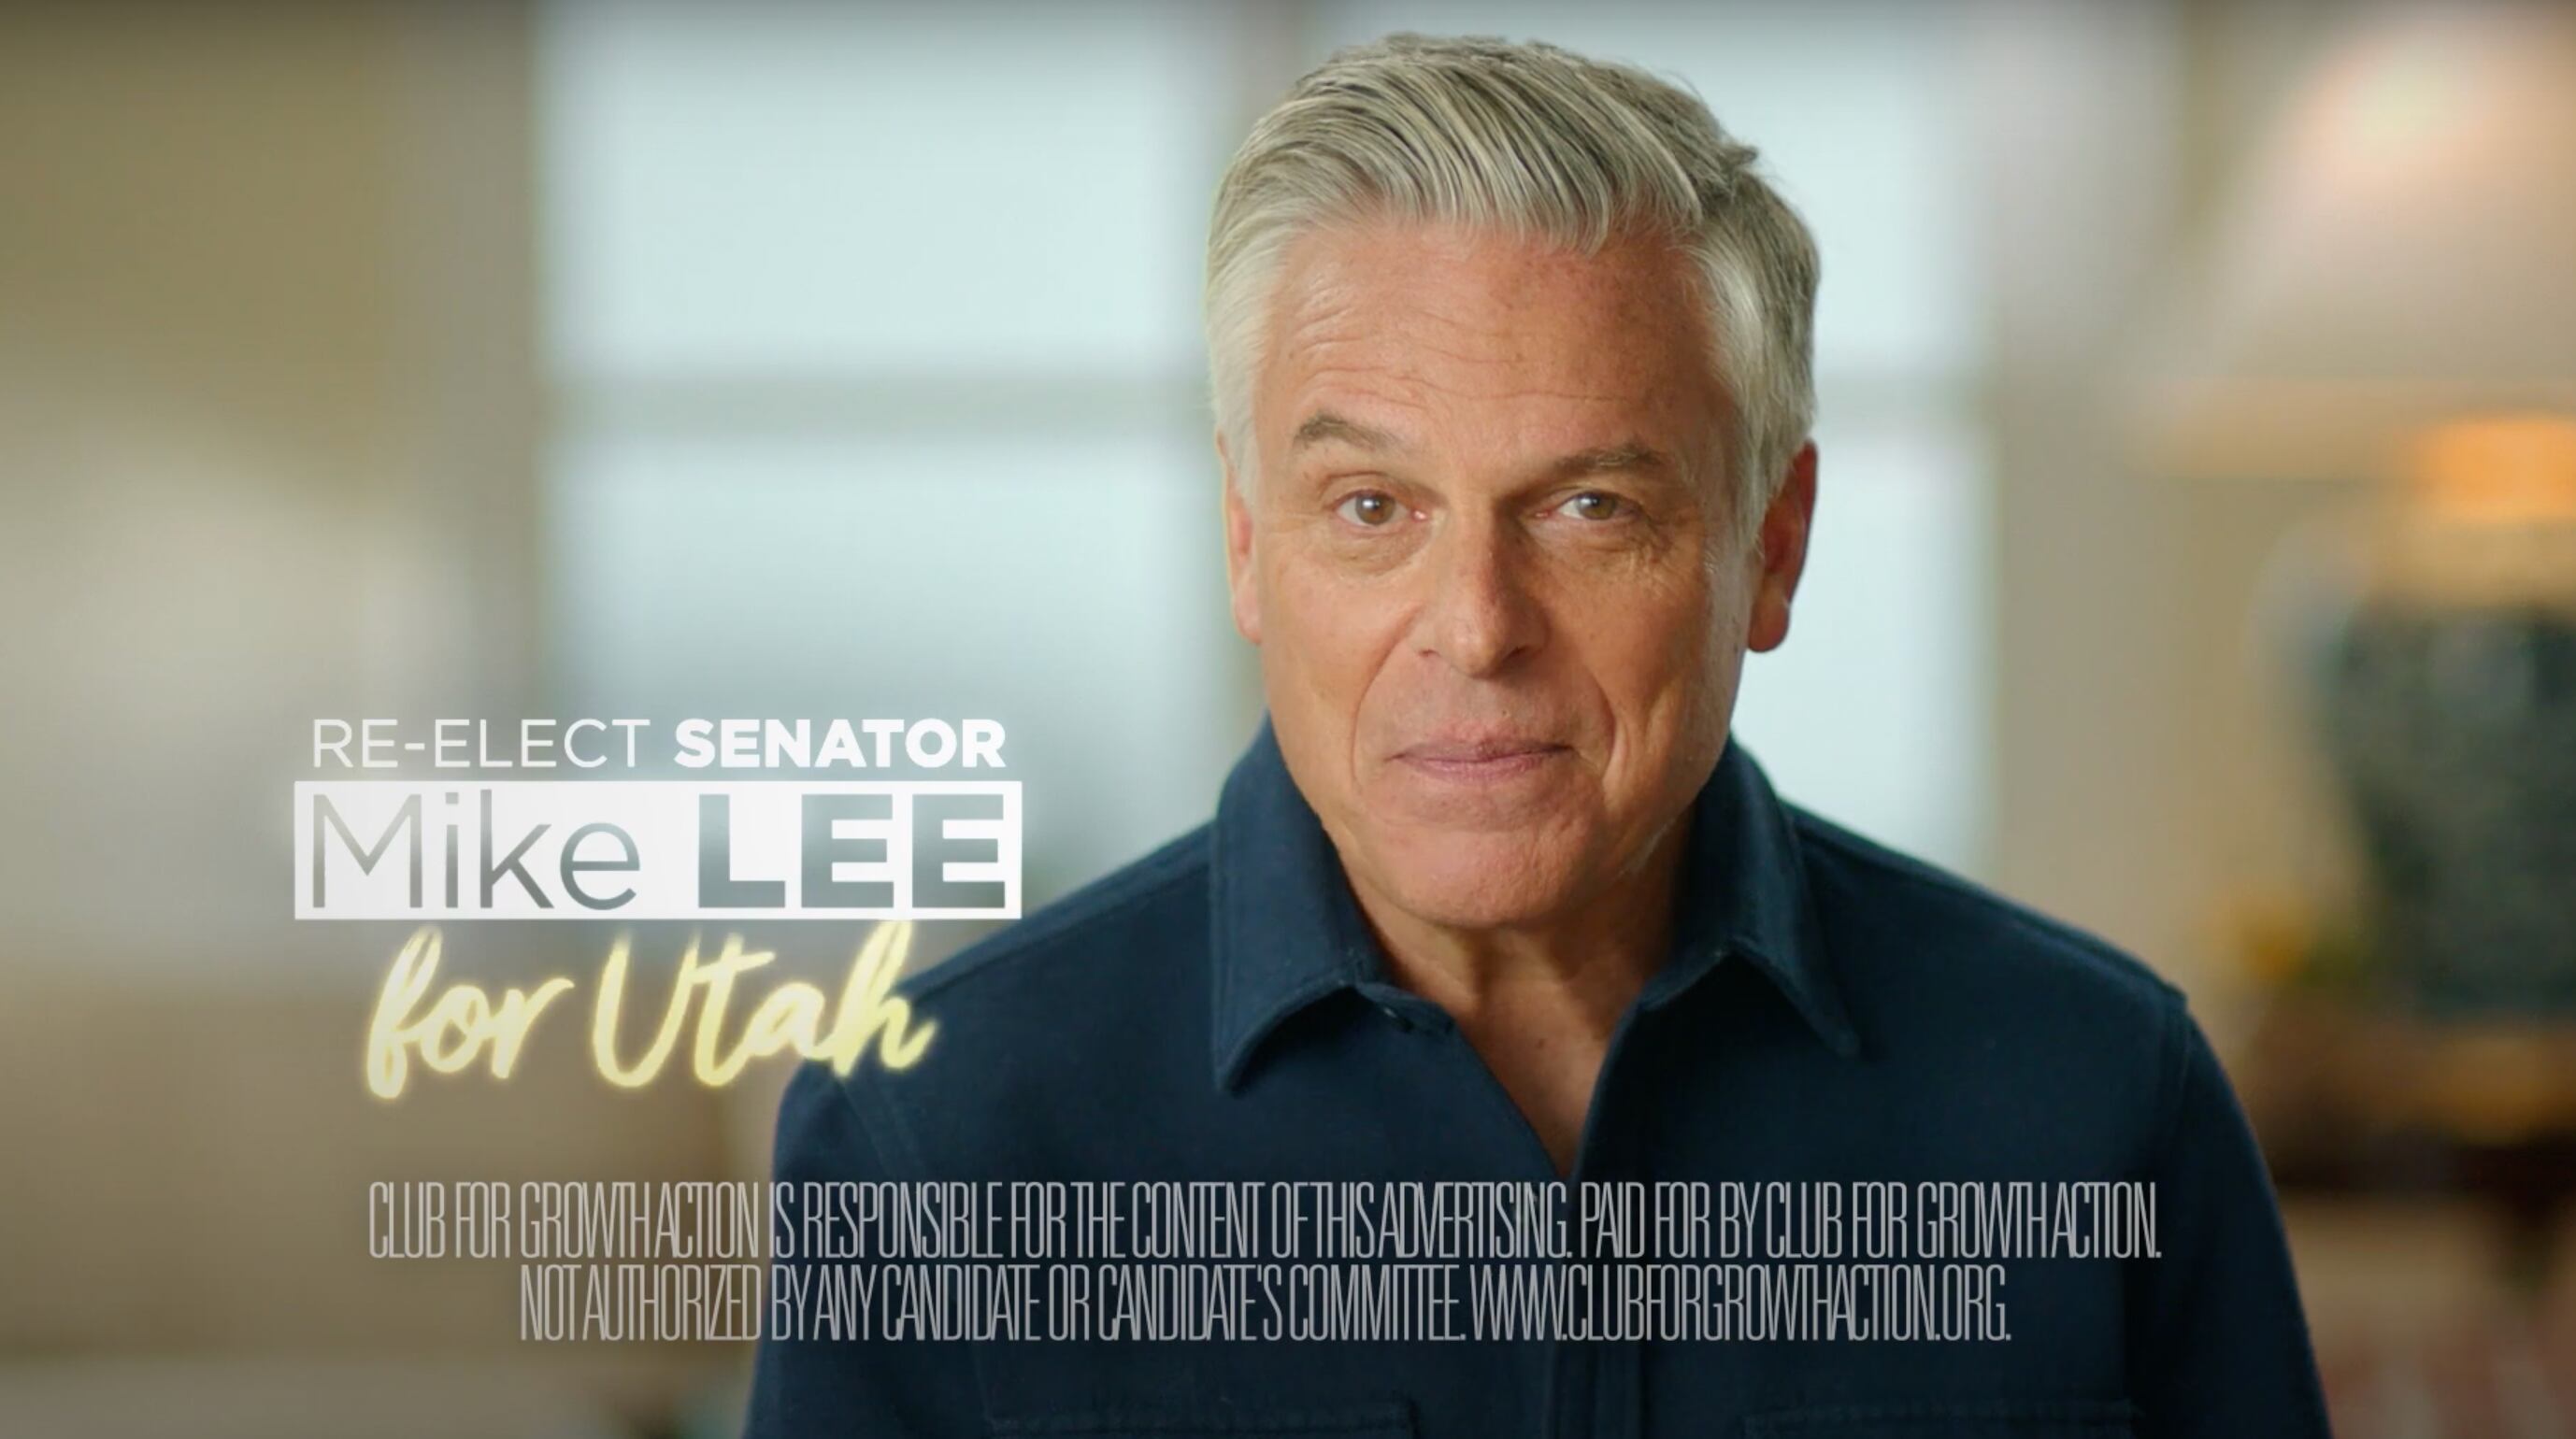 (Screenshot from YouTube) A screenshot from a Club for Growth ad where former Utah Gov. John Huntsman Jr. endorses Utah U.S. Senator Mike Lee for reelection in the 2022 midterm elections. The ad first aired on YouTube on Oct. 26, 2022.